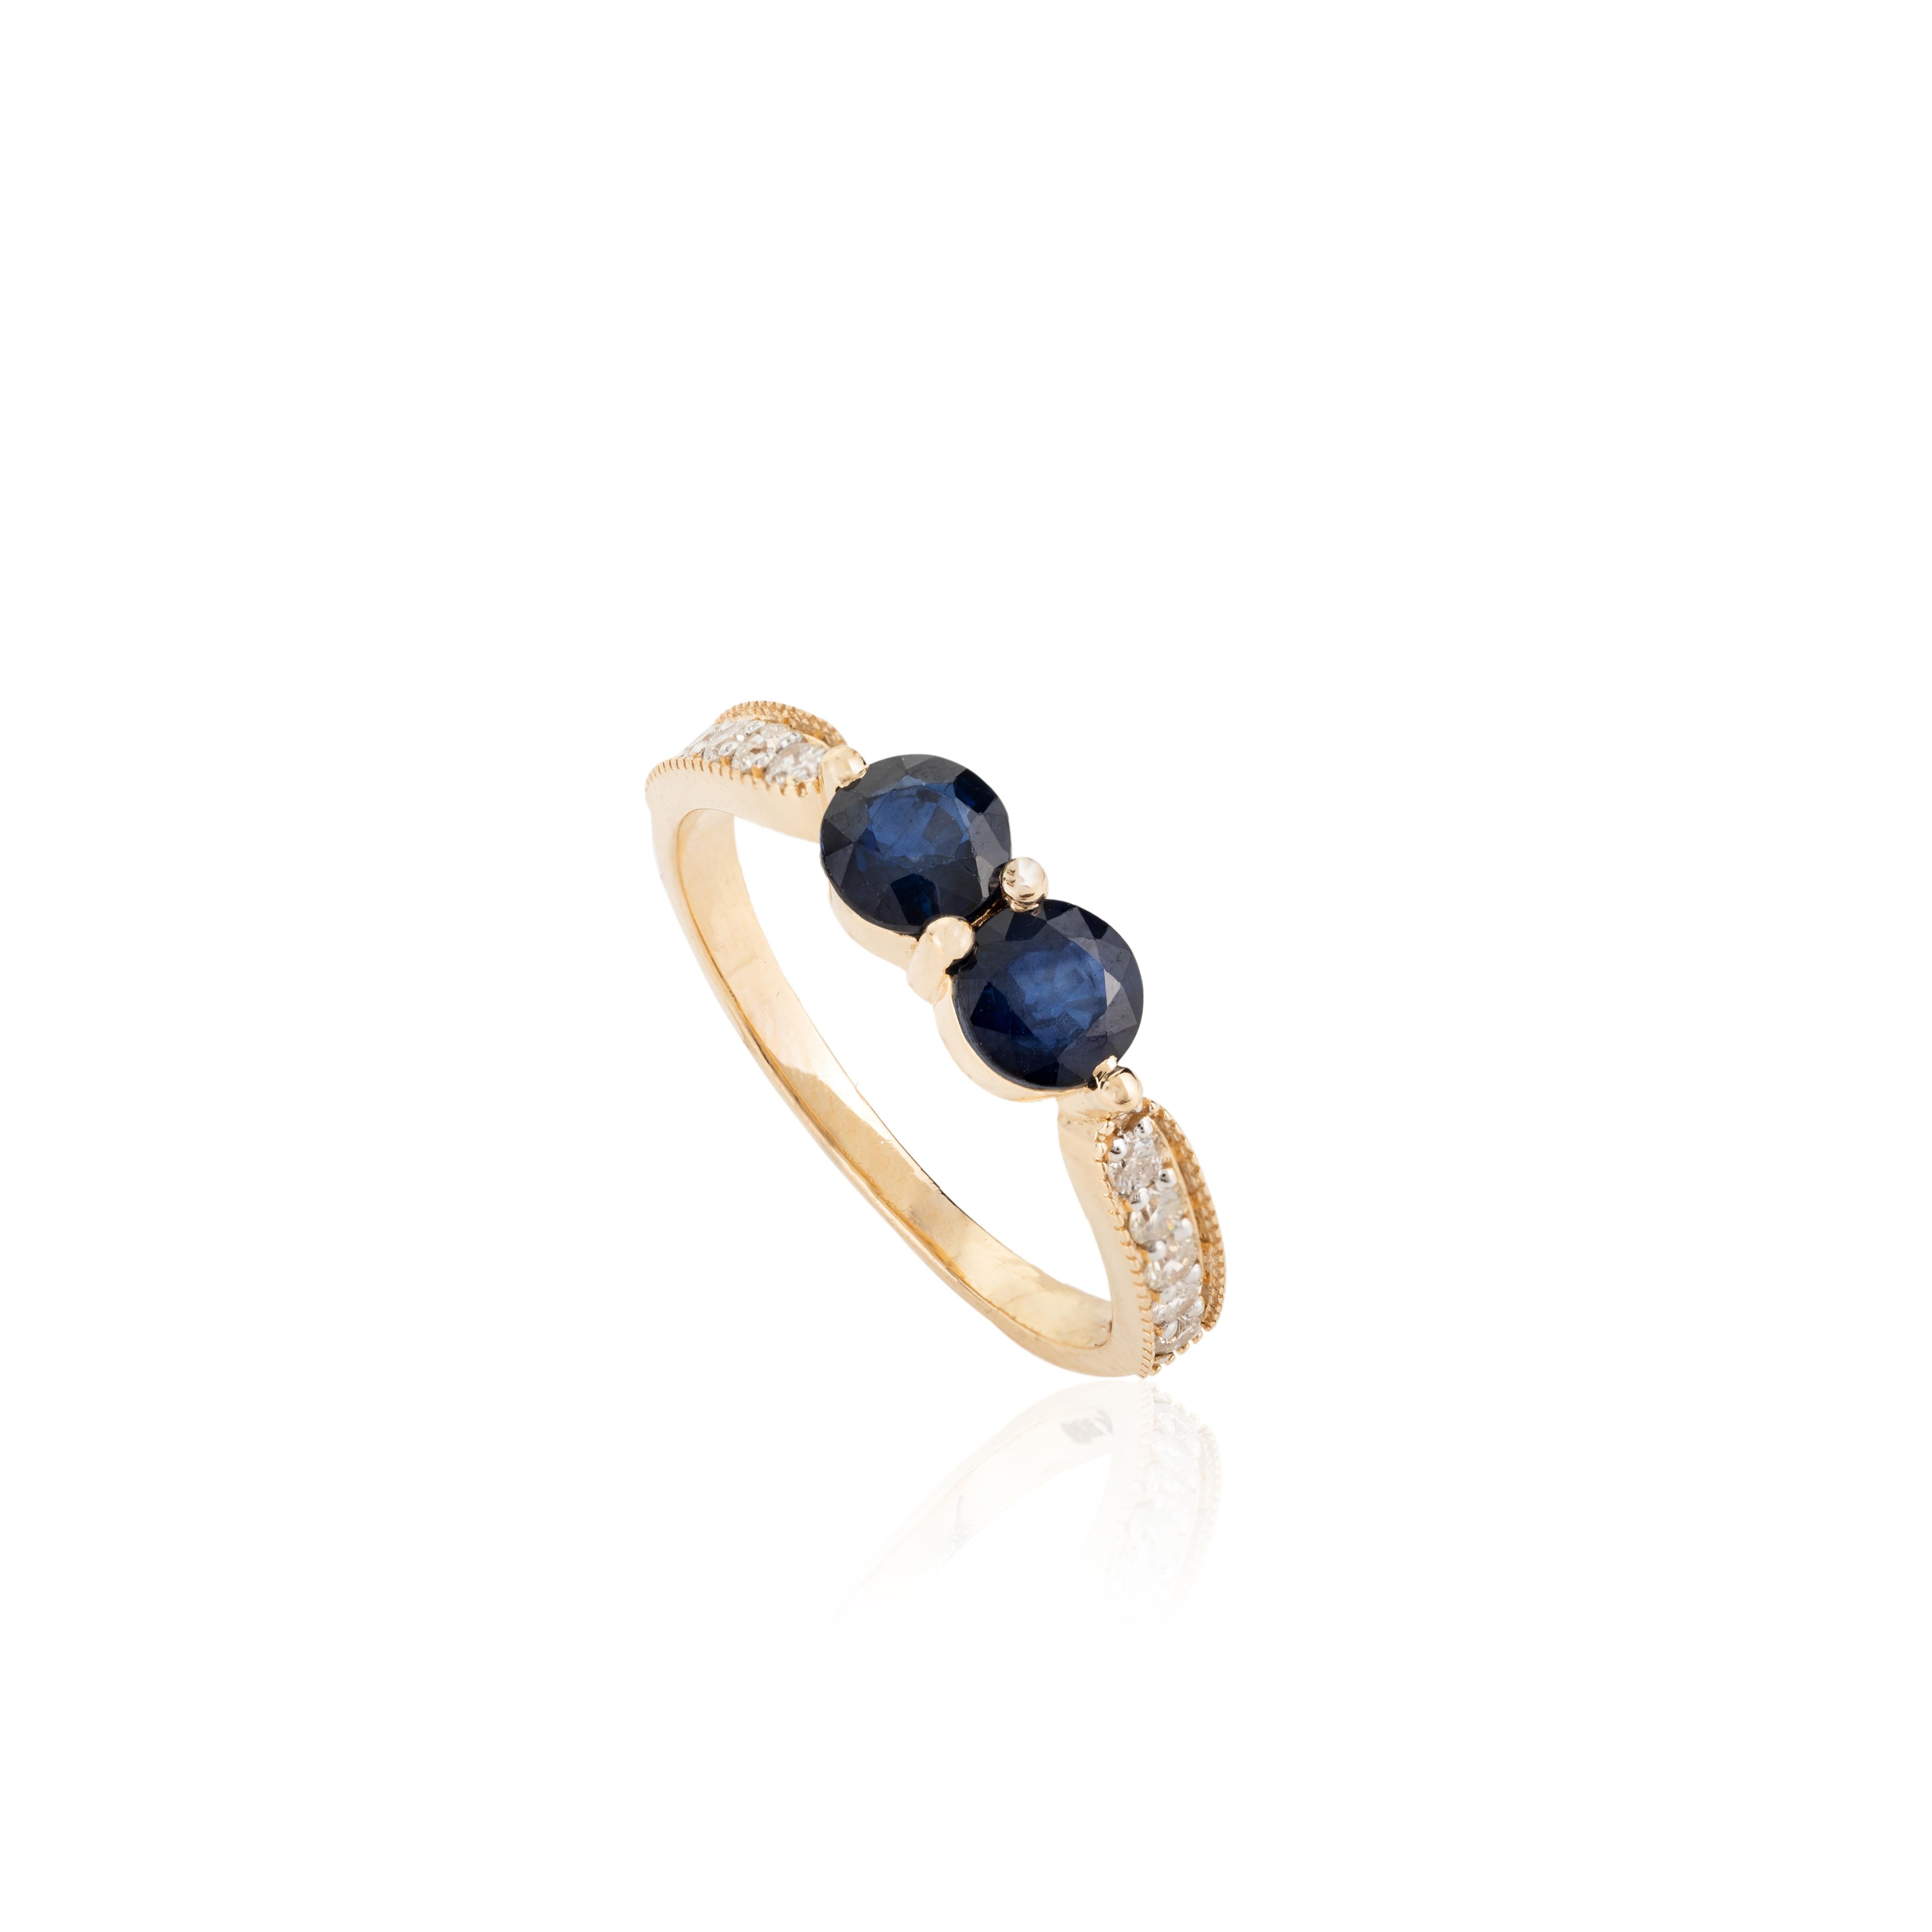 For Sale:  18k Solid Yellow Gold Two Stone Blue Sapphire Diamond Ring Wedding Gift for Her 8